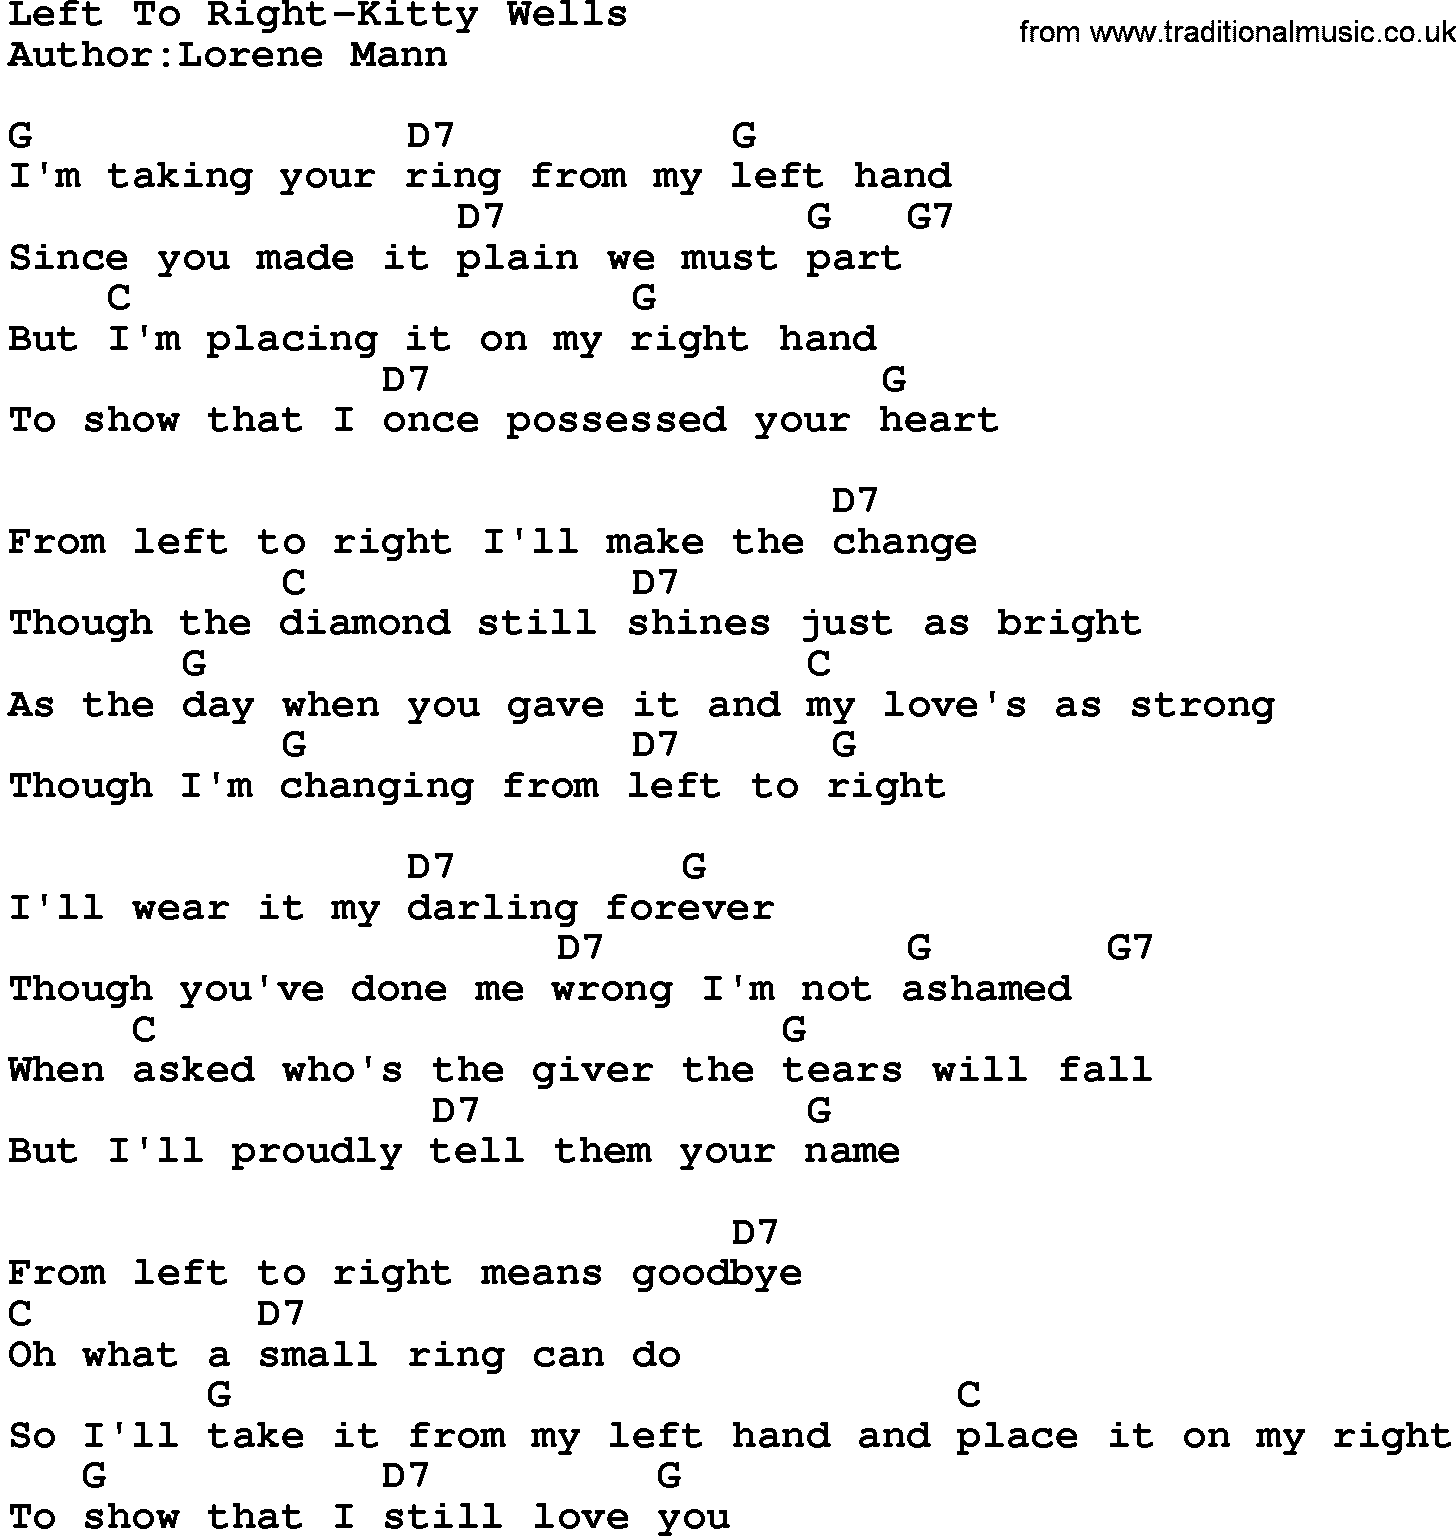 Country music song: Left To Right-Kitty Wells lyrics and chords